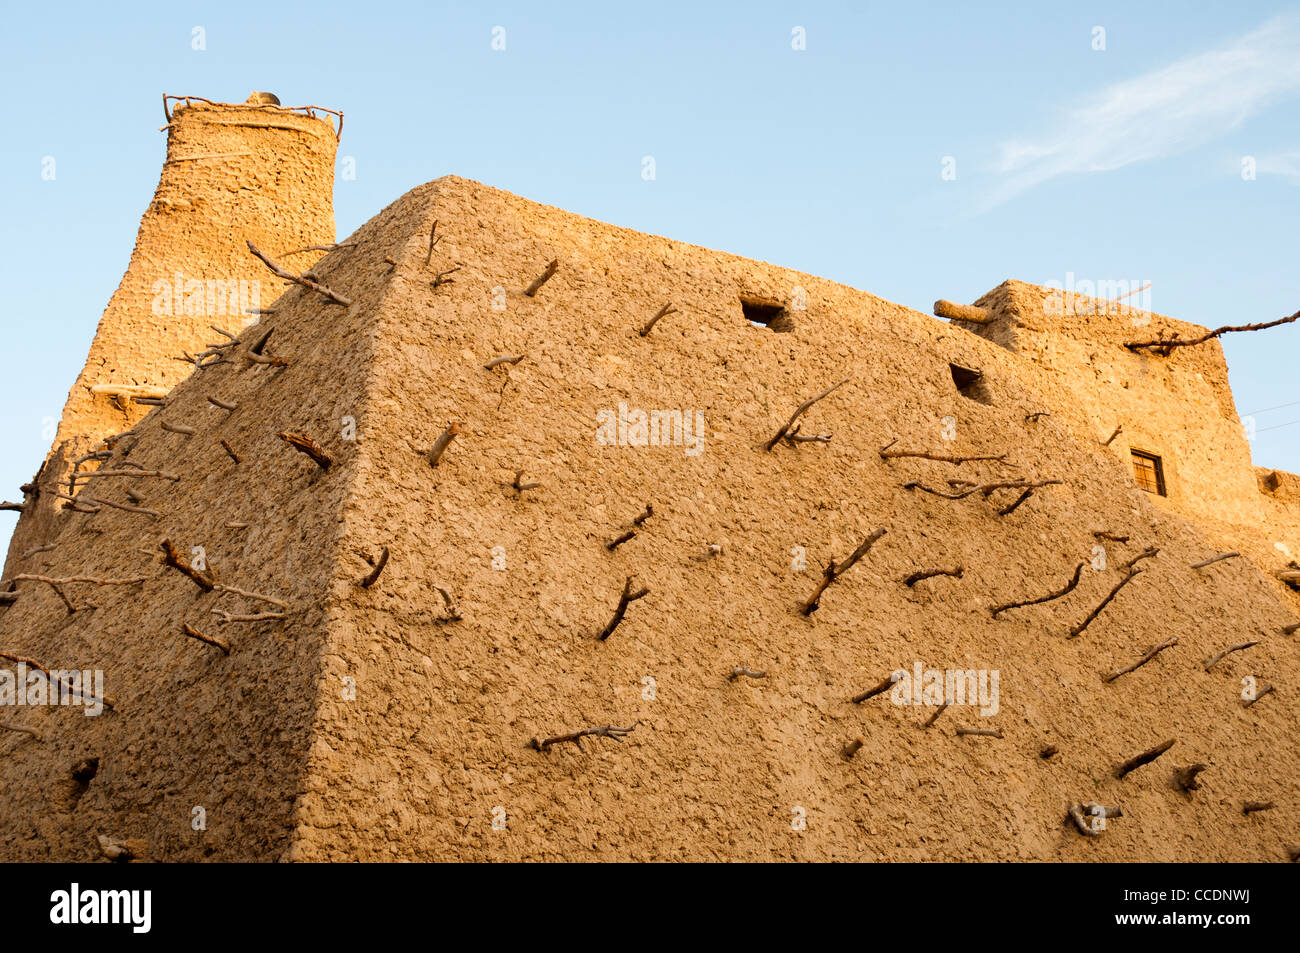 Mosque in the ruined mudbrick fortress town of Shali, Siwa, Egypt Stock Photo